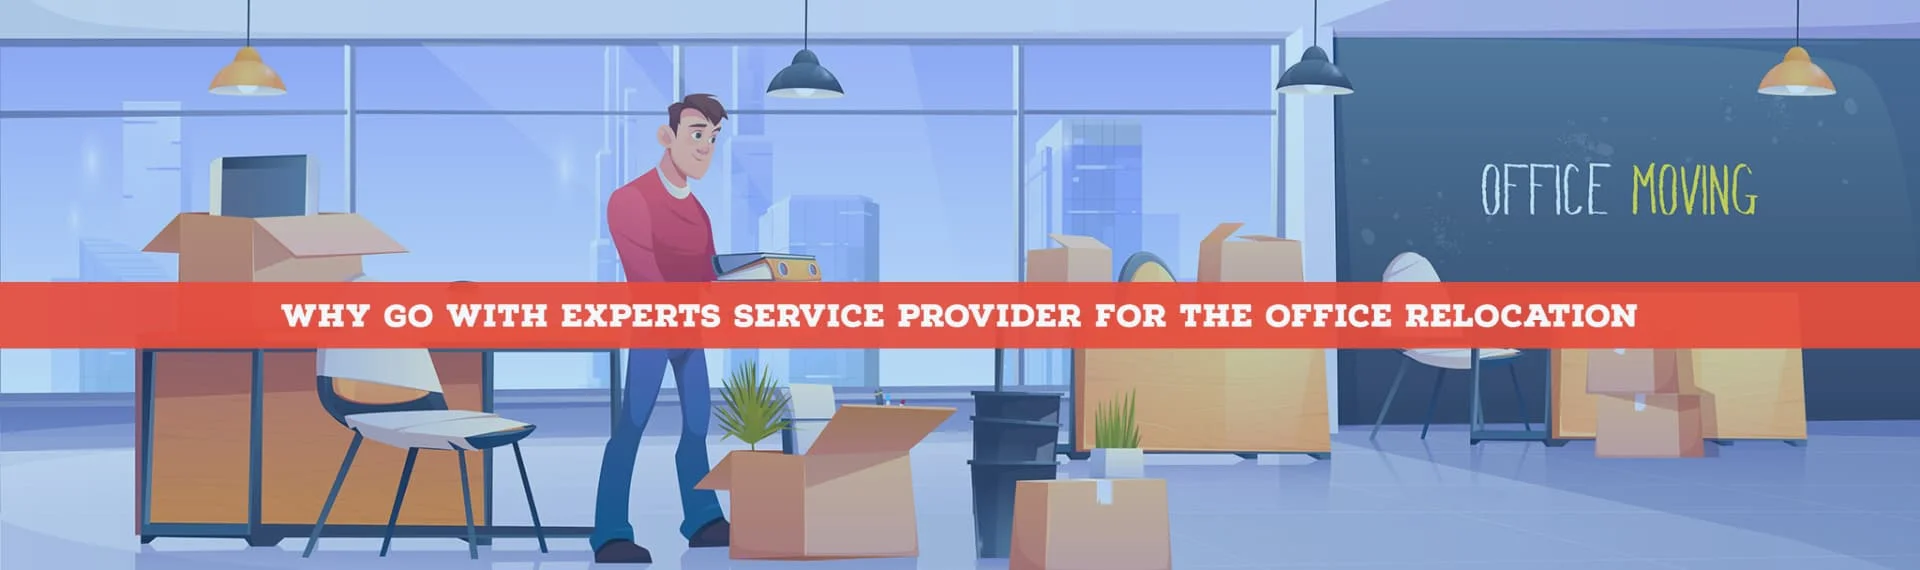 Why Go With Experts Service Provider For The Office Relocation